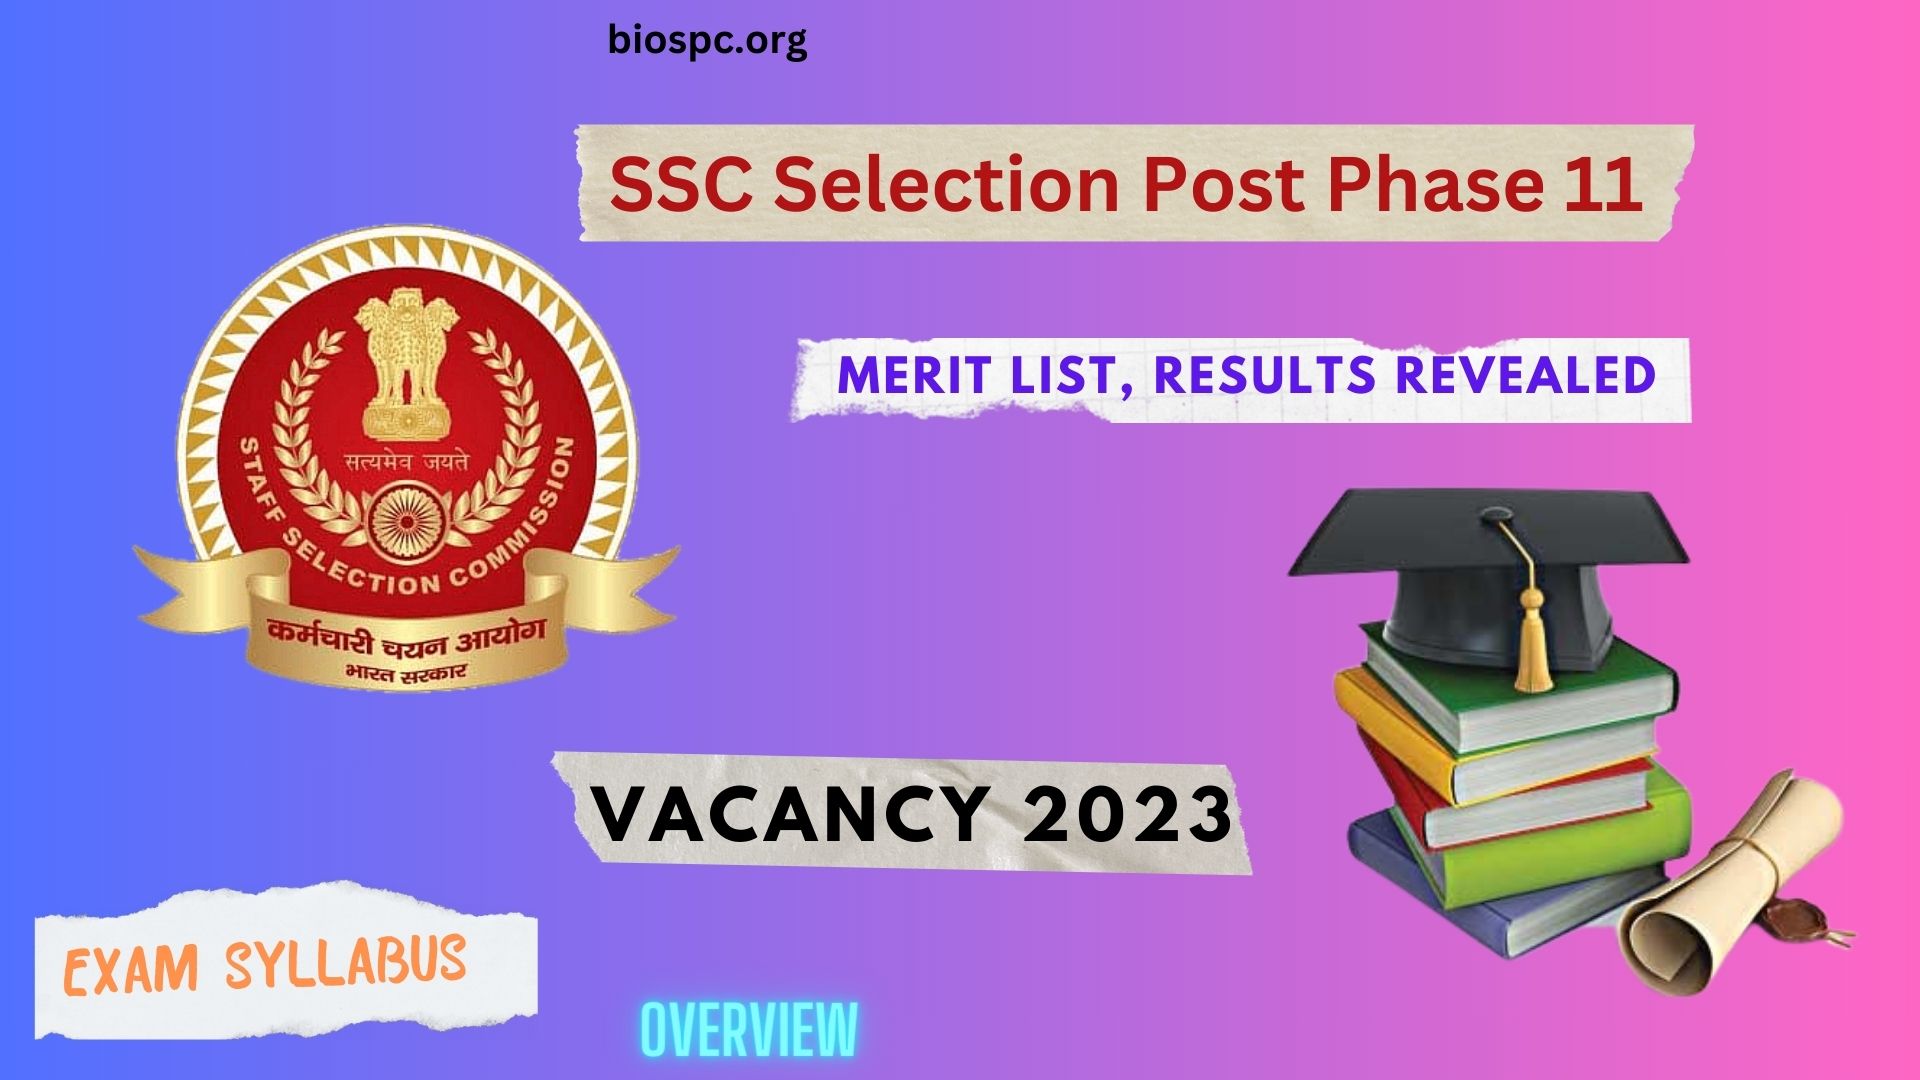 SSC Selection Post Phase 11